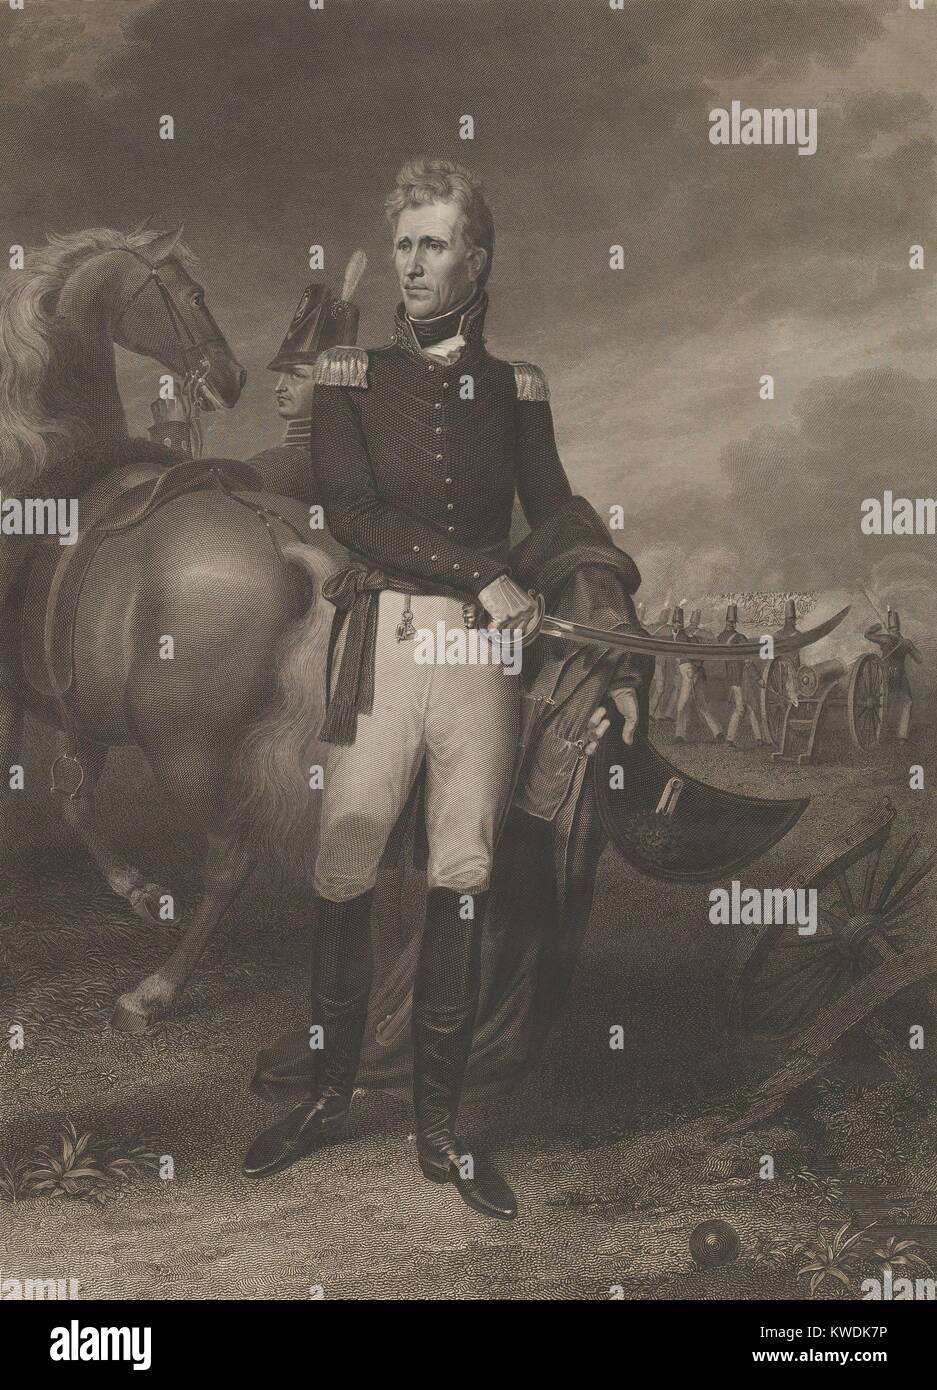 General Andrew Jackson in 1828 military portrait engraving by Asher Brown Durand. Copied from a painting by John Vanderlyn depicting Jackson in uniforms with nearby horse and soldiers firing cannons in the background (BSLOC 2017 6 4) Stock Photo